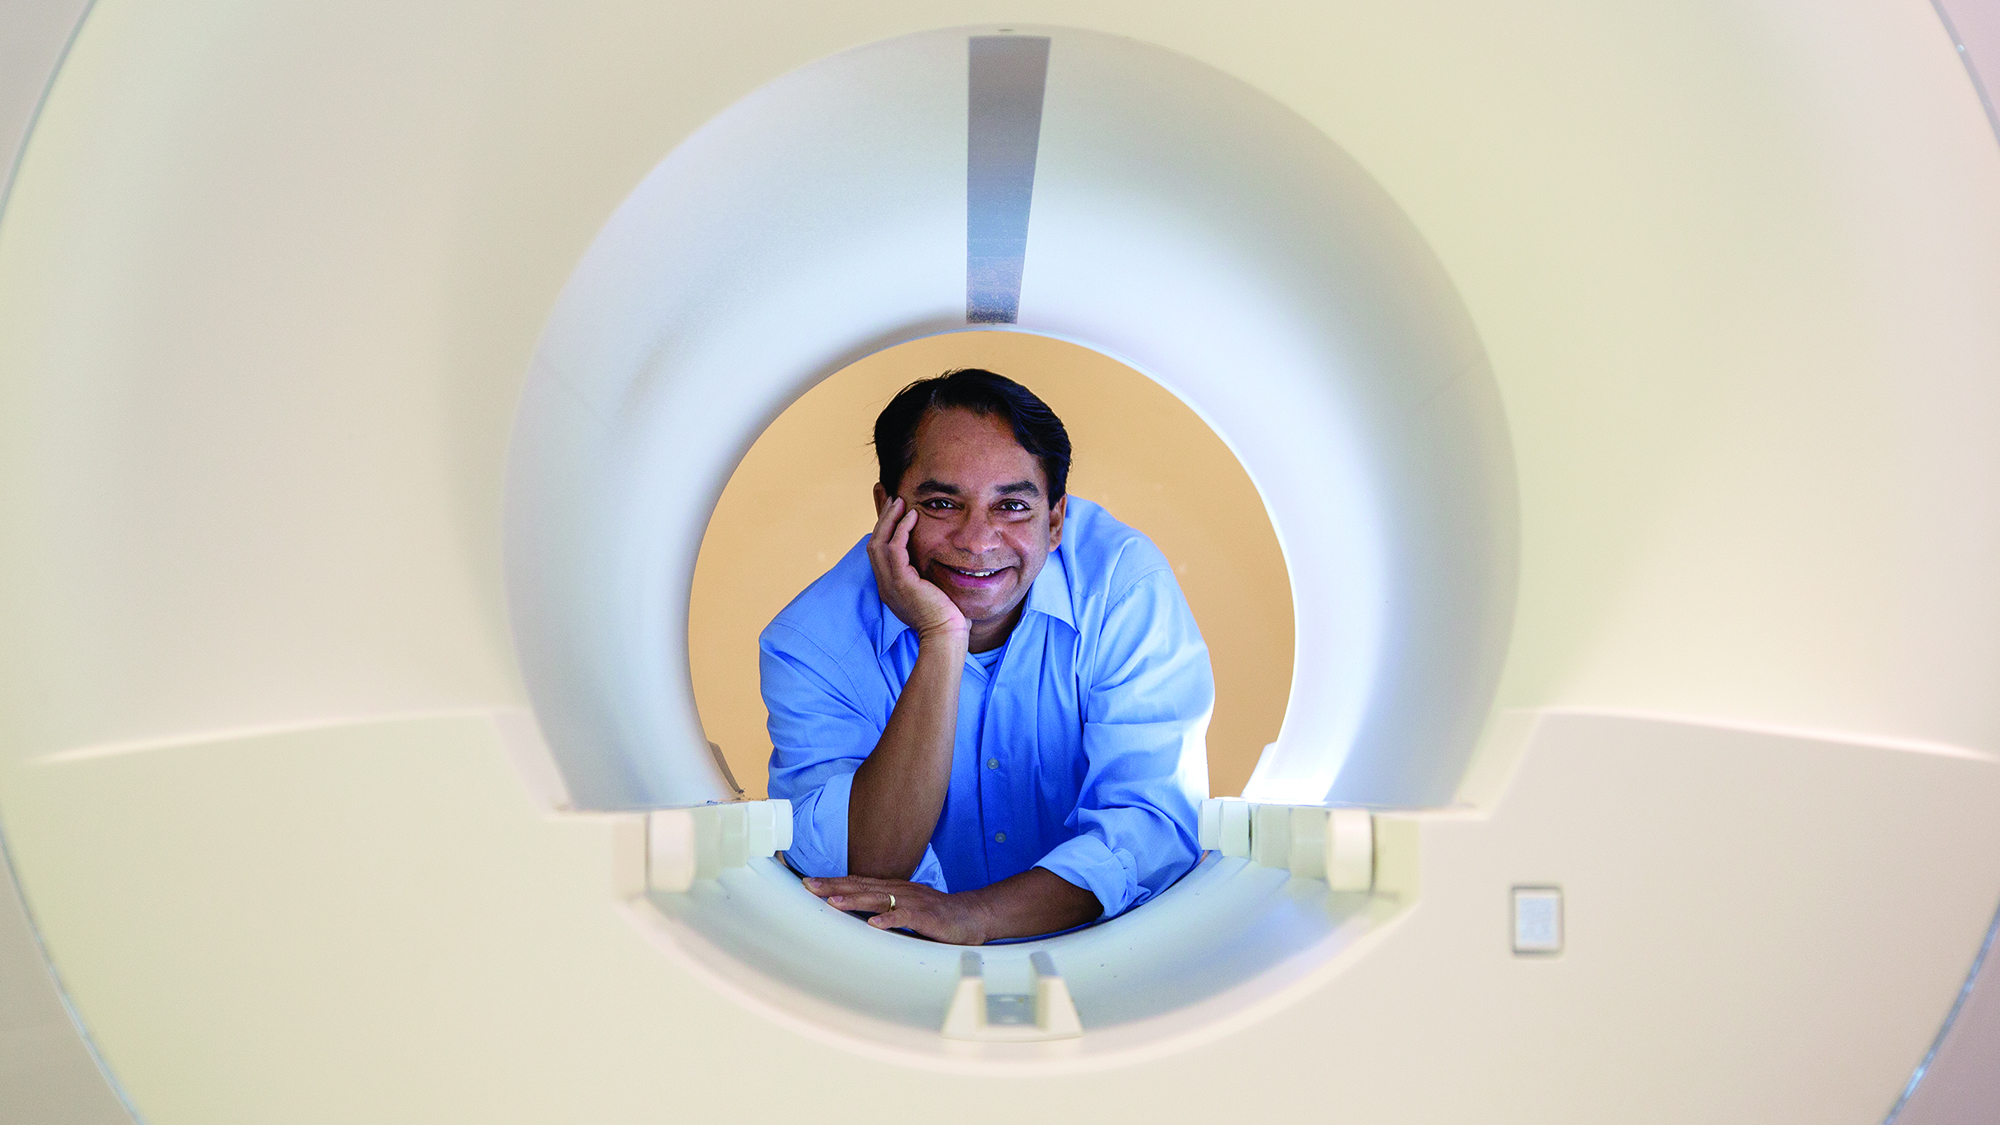 Radiology Imaging Innovation Research Development Fund